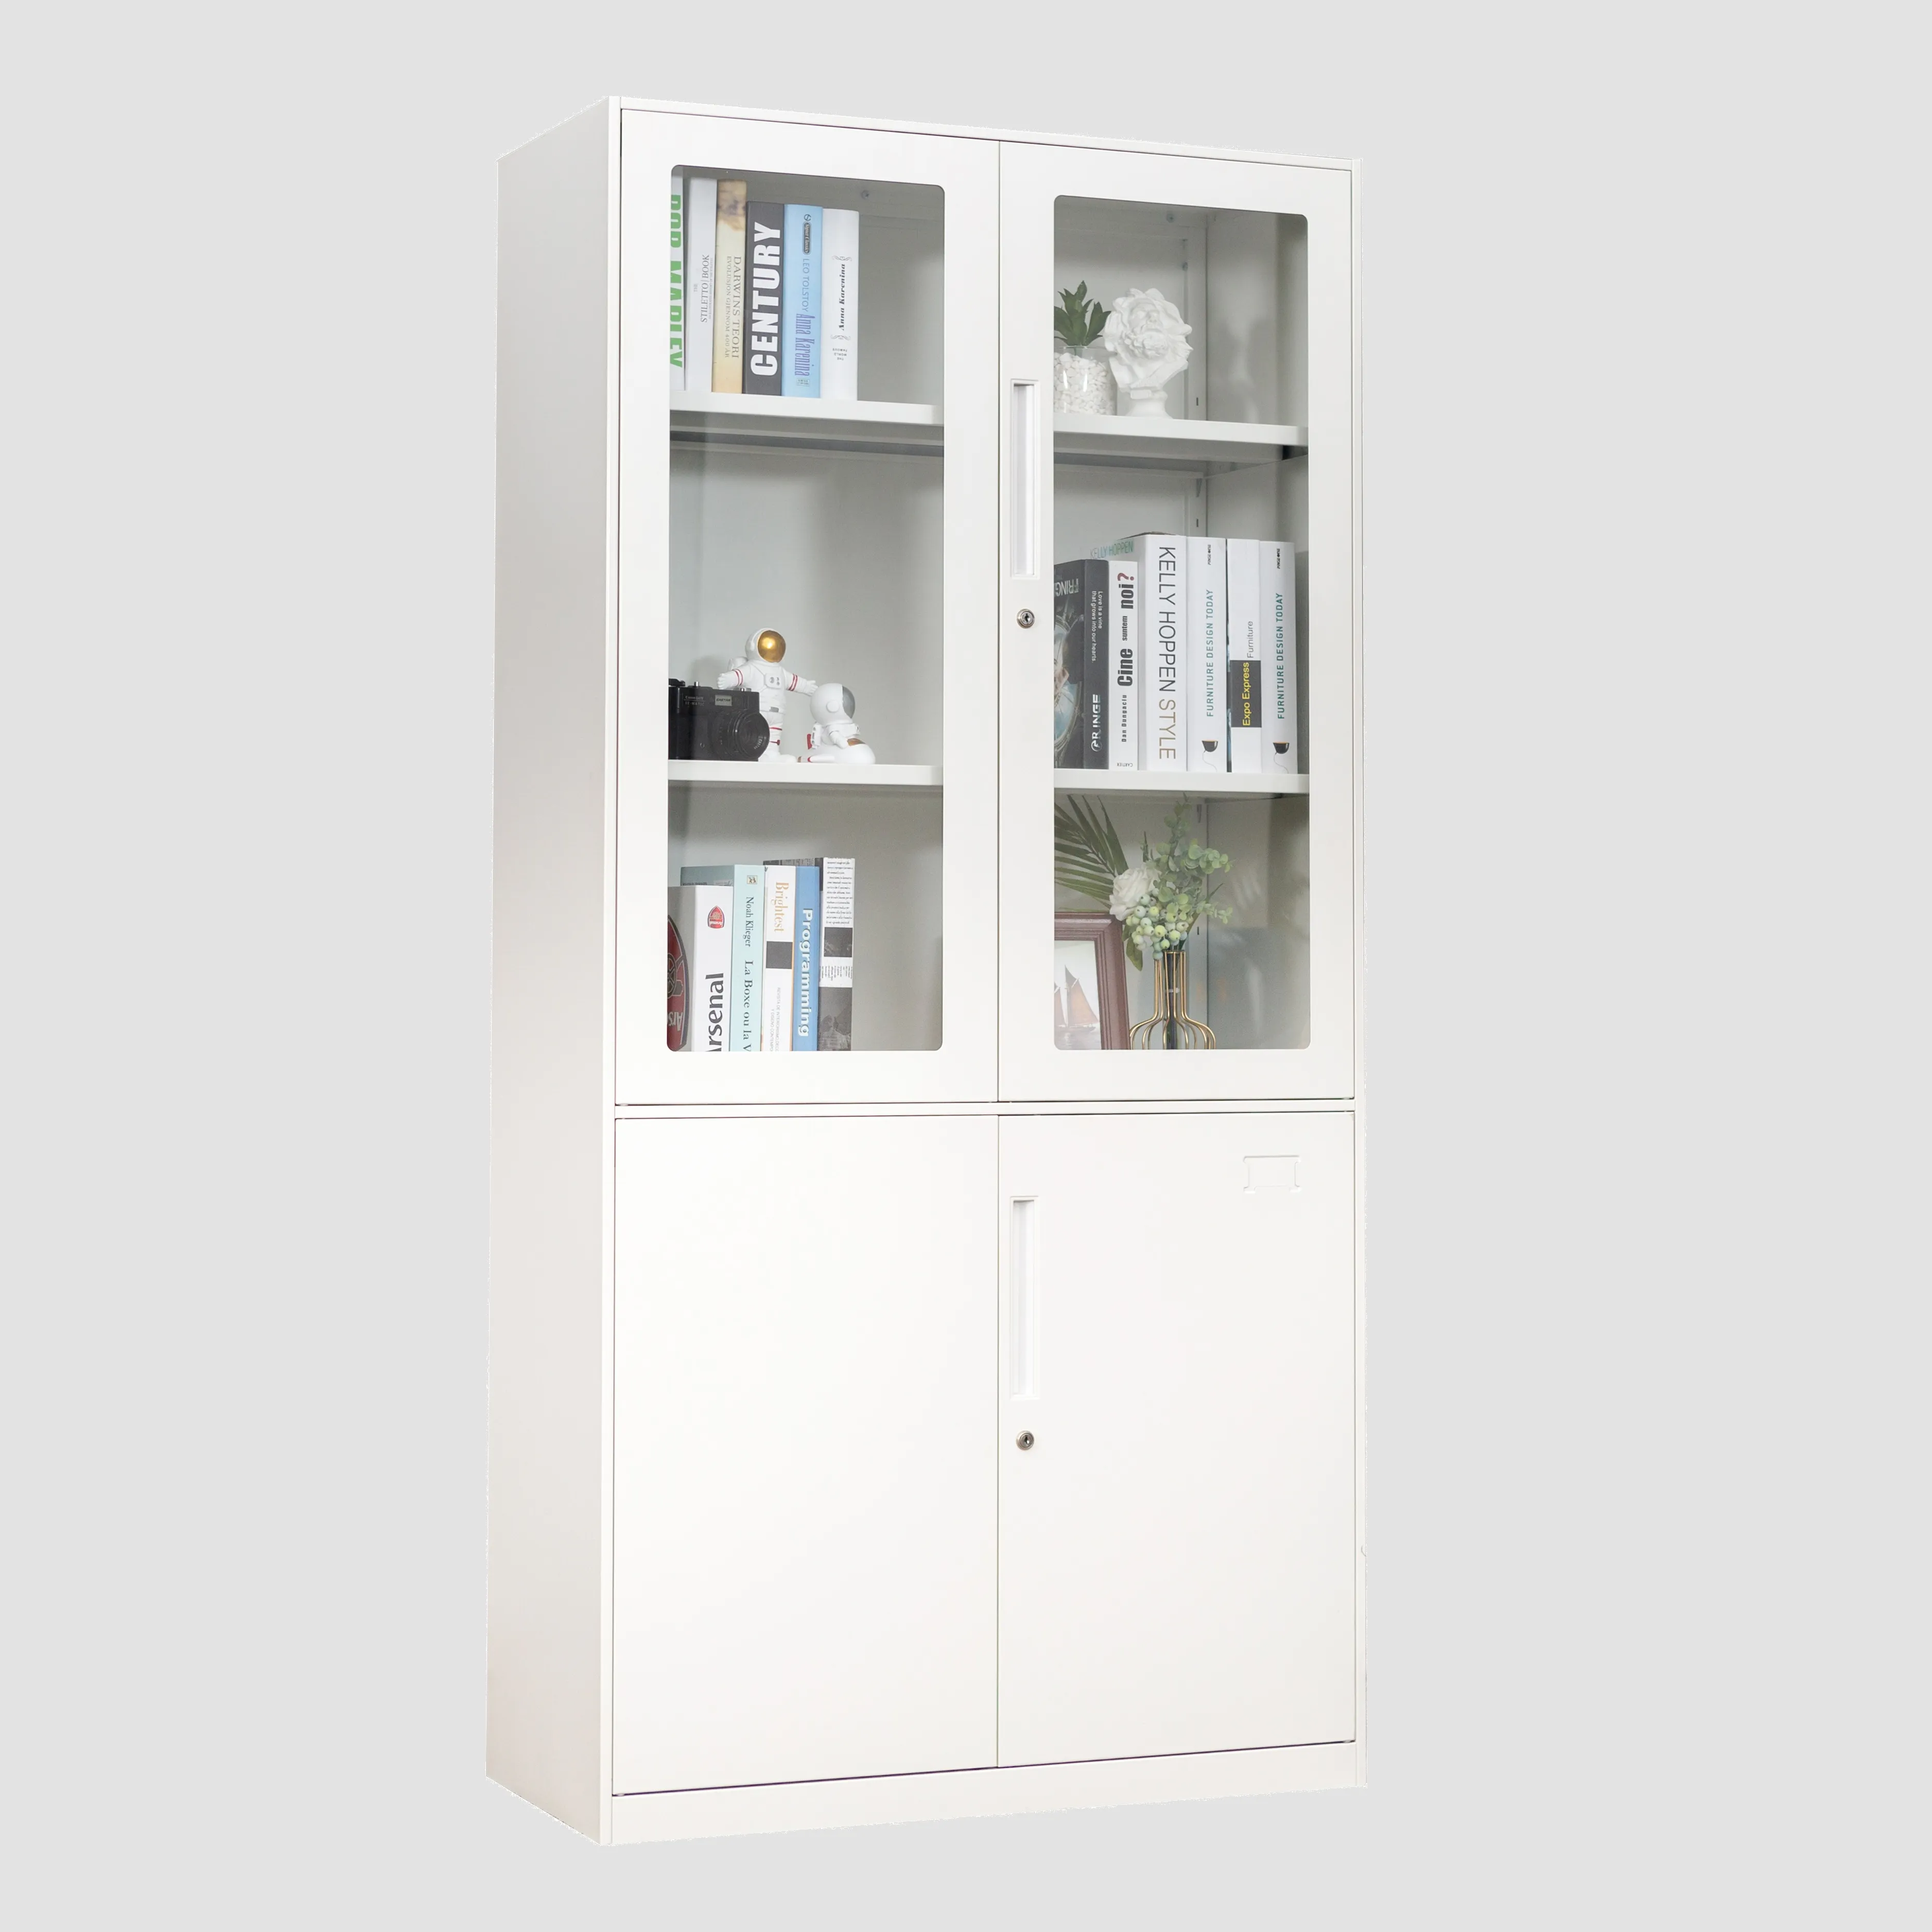 Steel storage glass display filing cabinets stand furniture office furniture cabinet